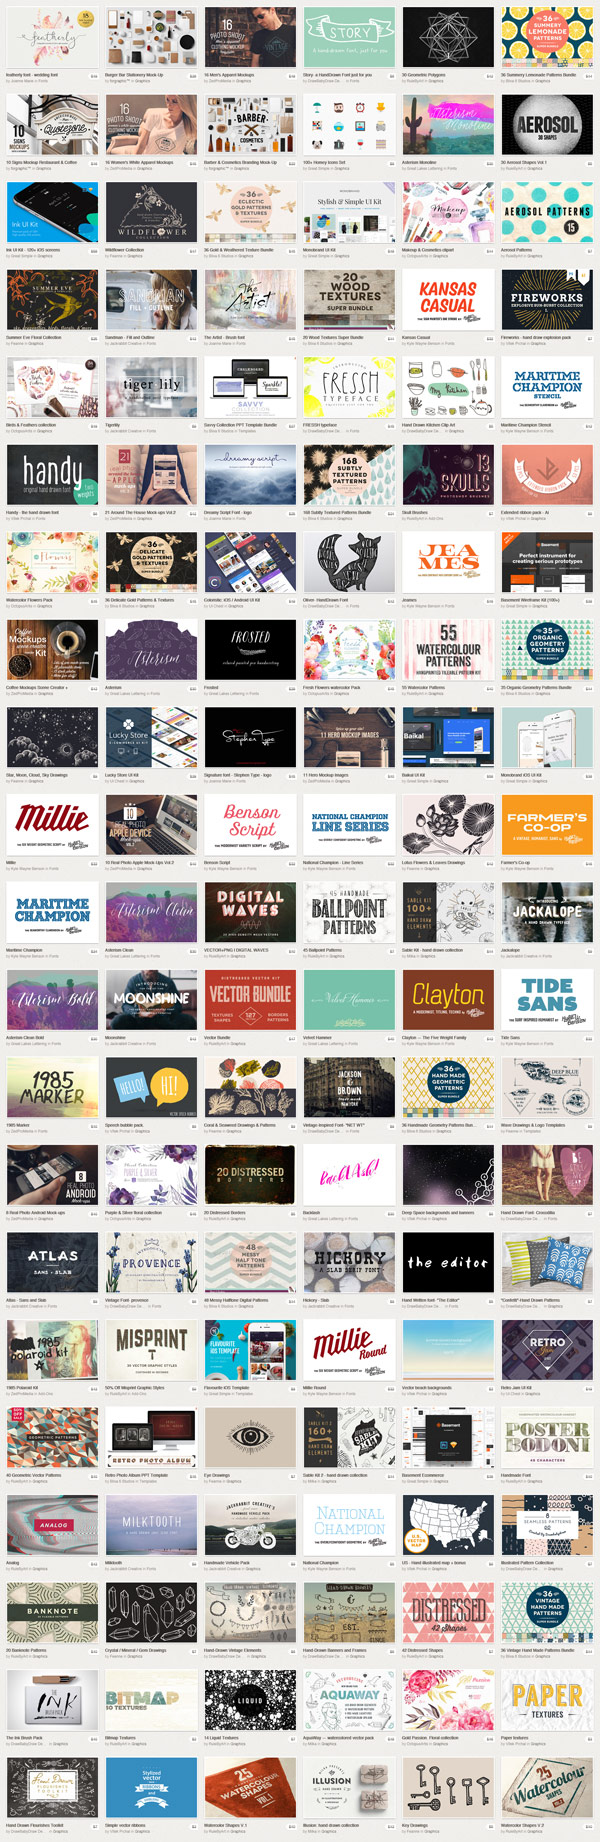 Creative Market's August Big Bundle 2015. 130 digital products worth $1,936 for only $39! This spevial offer is available only for a limited time!